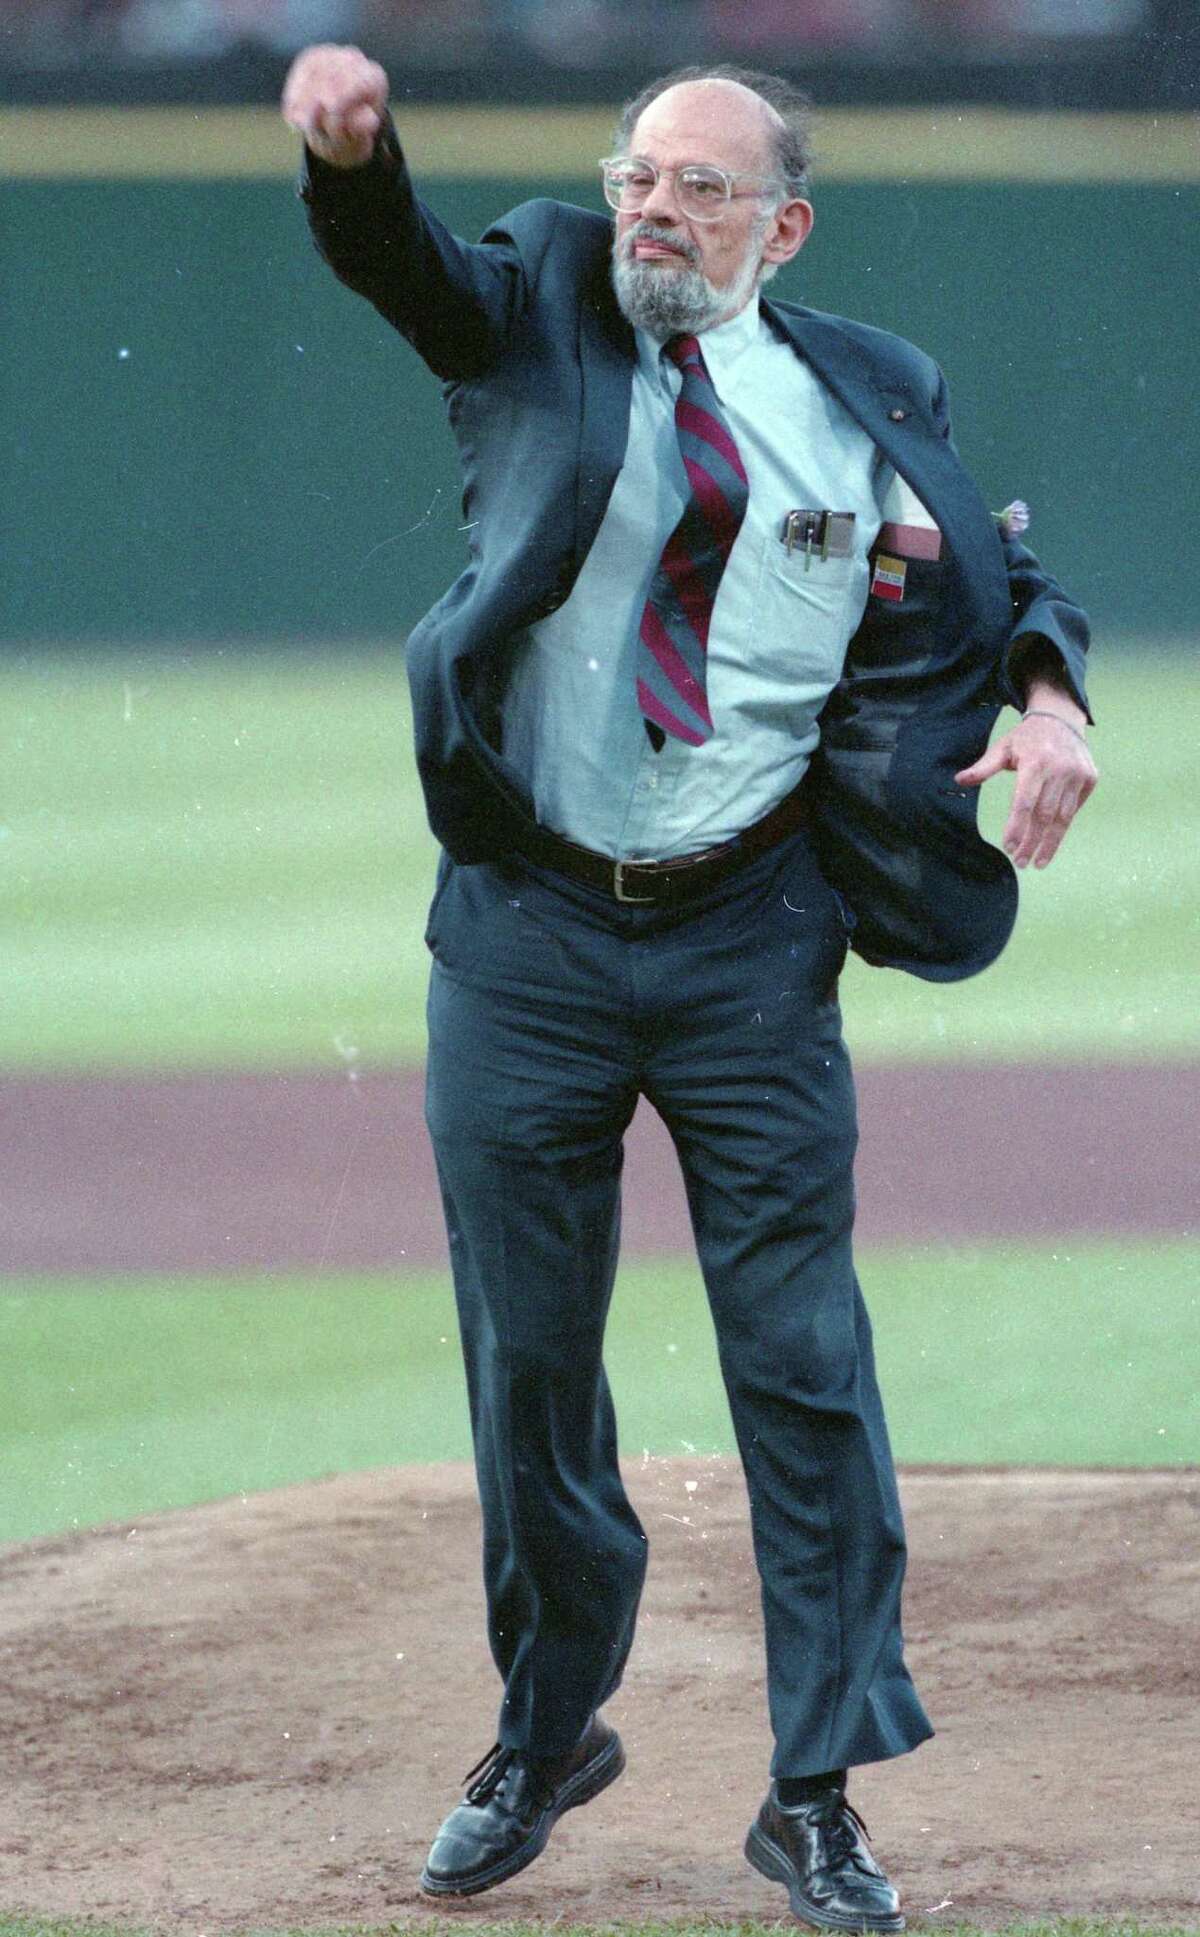 Allen Ginsberg throws a solid first pitch at a Giants game.